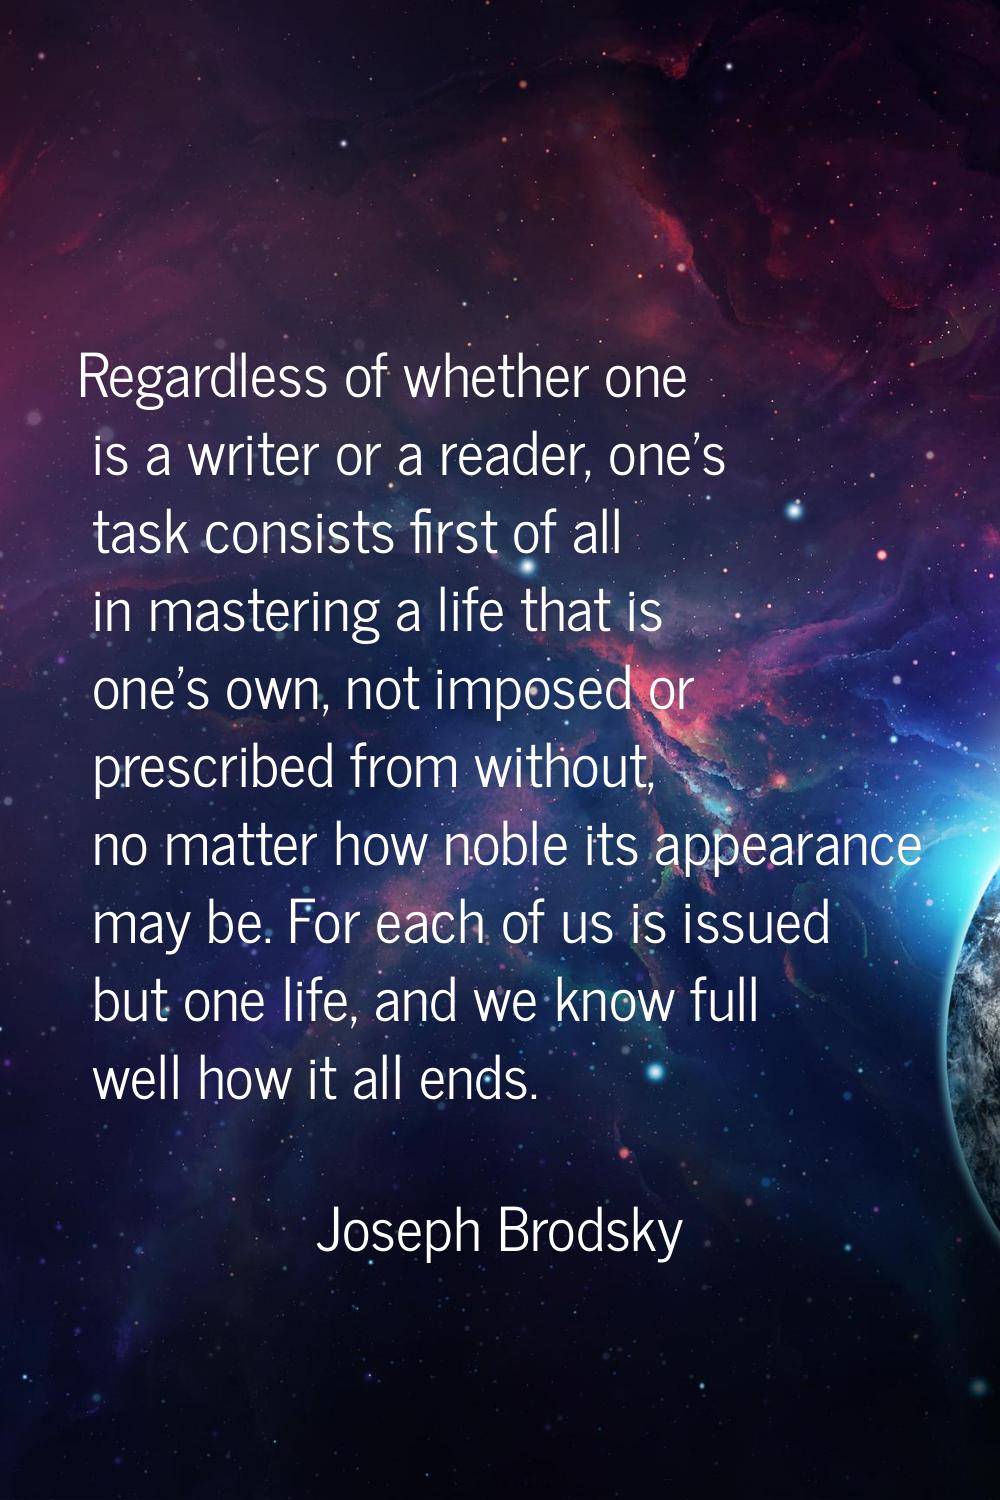 Regardless of whether one is a writer or a reader, one's task consists first of all in mastering a 